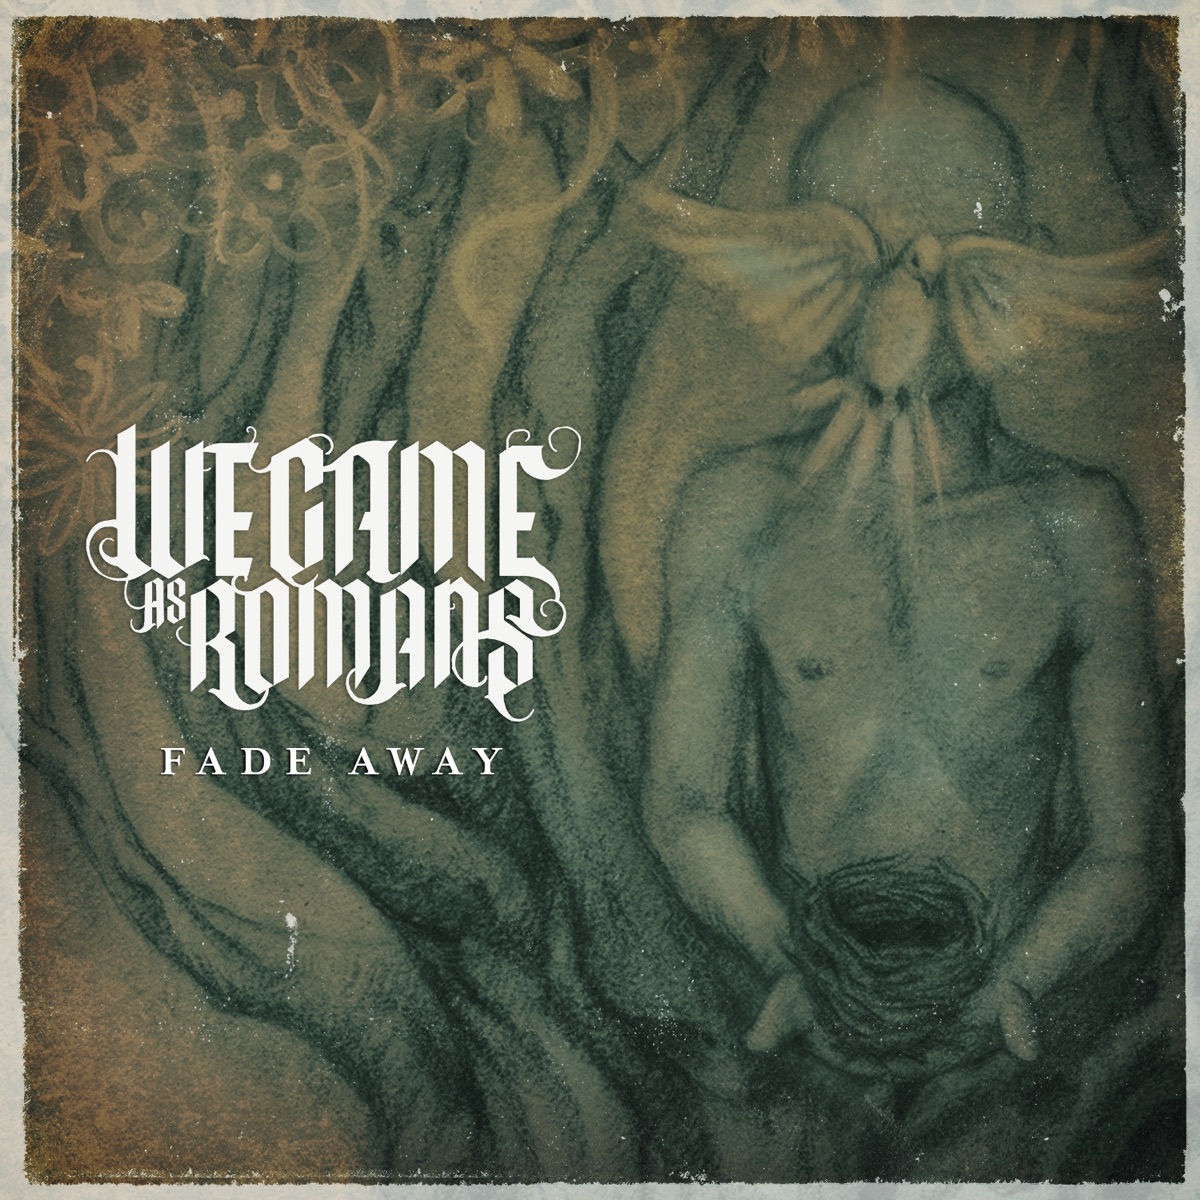 Fade Away - Single by We Came As Romans on Apple Music